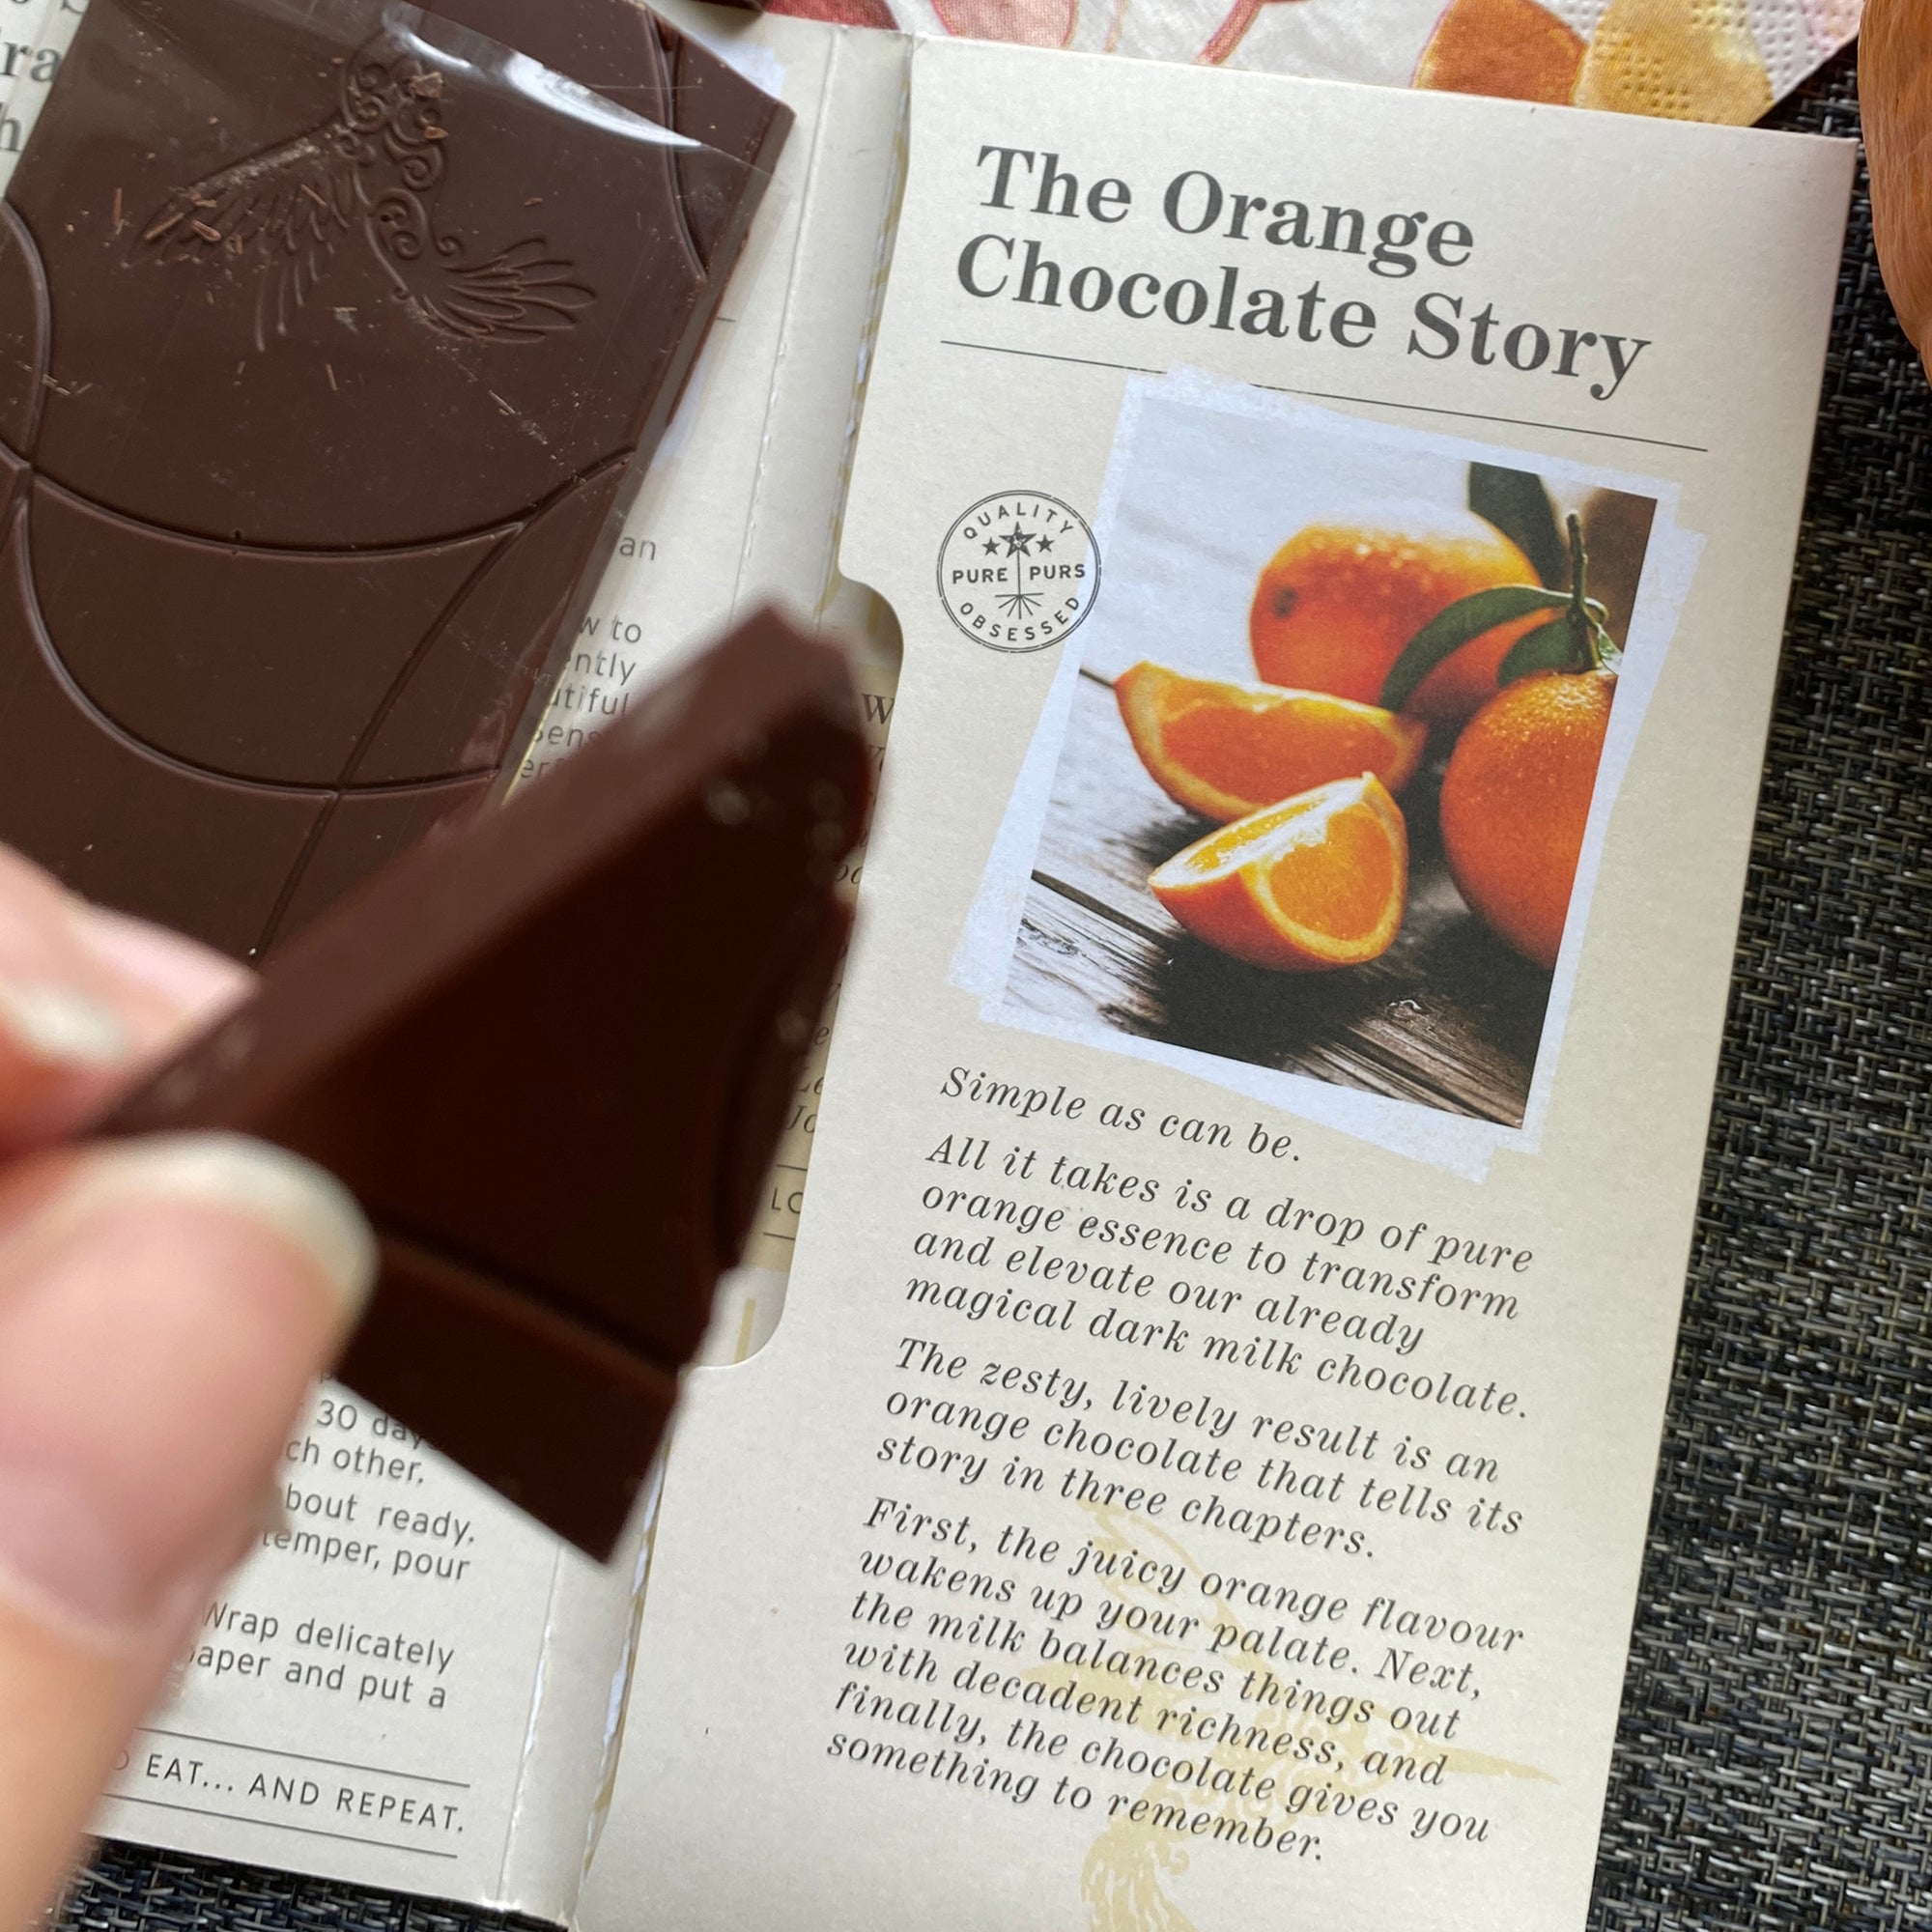 Opened orange chocolate bar, revealing story behind this zesty flavour combination and delicious chocolate indulgence